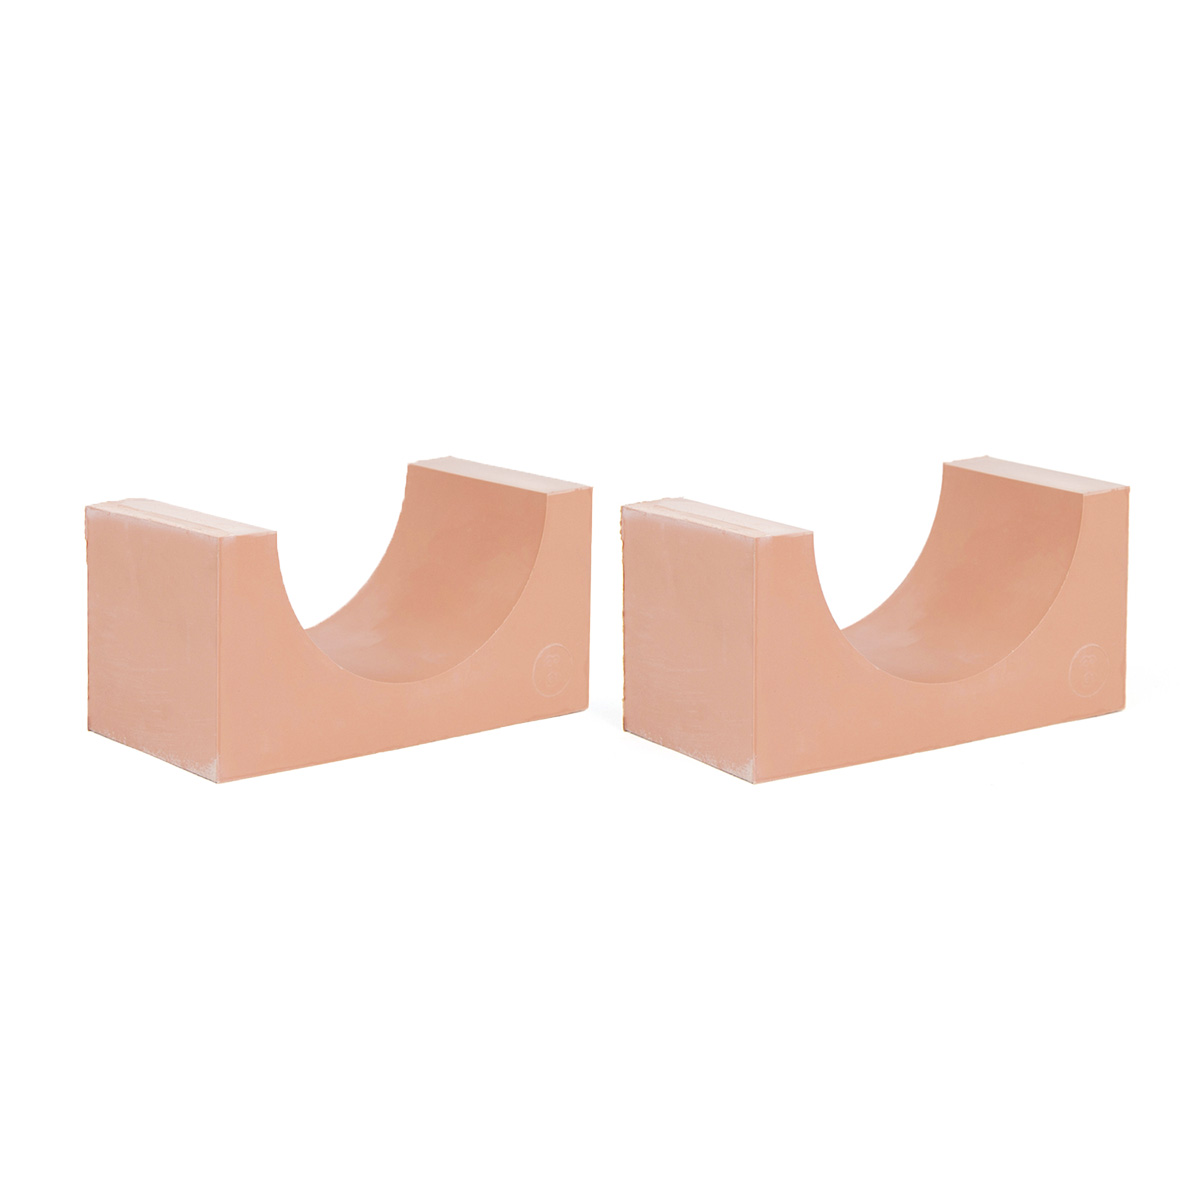 120-96*2 Set of 2 half insert block lycron, 120-96 for cable/pipe diam. 95.5-97.5mm